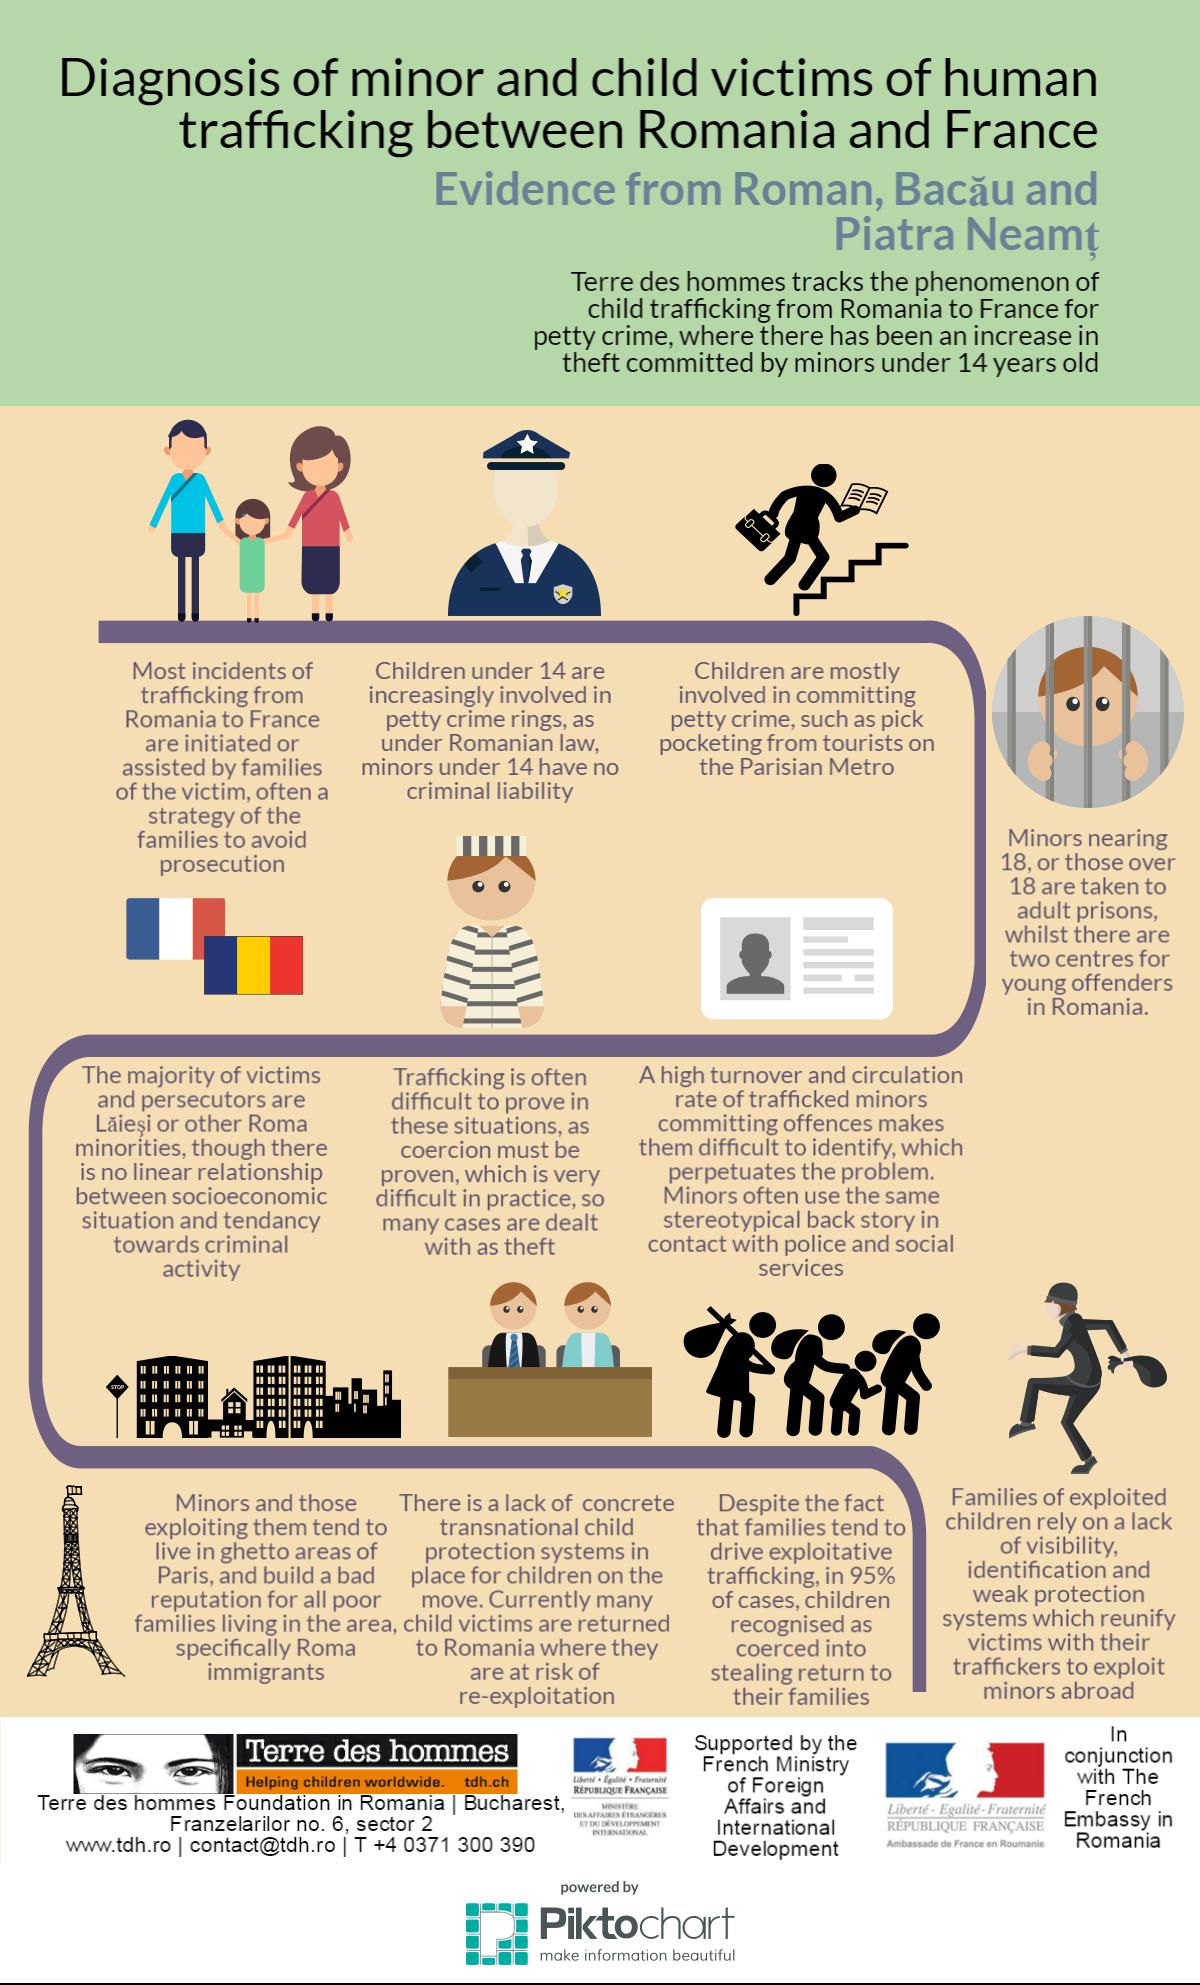 Diagnosis of Minor and Child Victims of Human Trafficking between Romania and France #infographic #Child trafficking #infographics